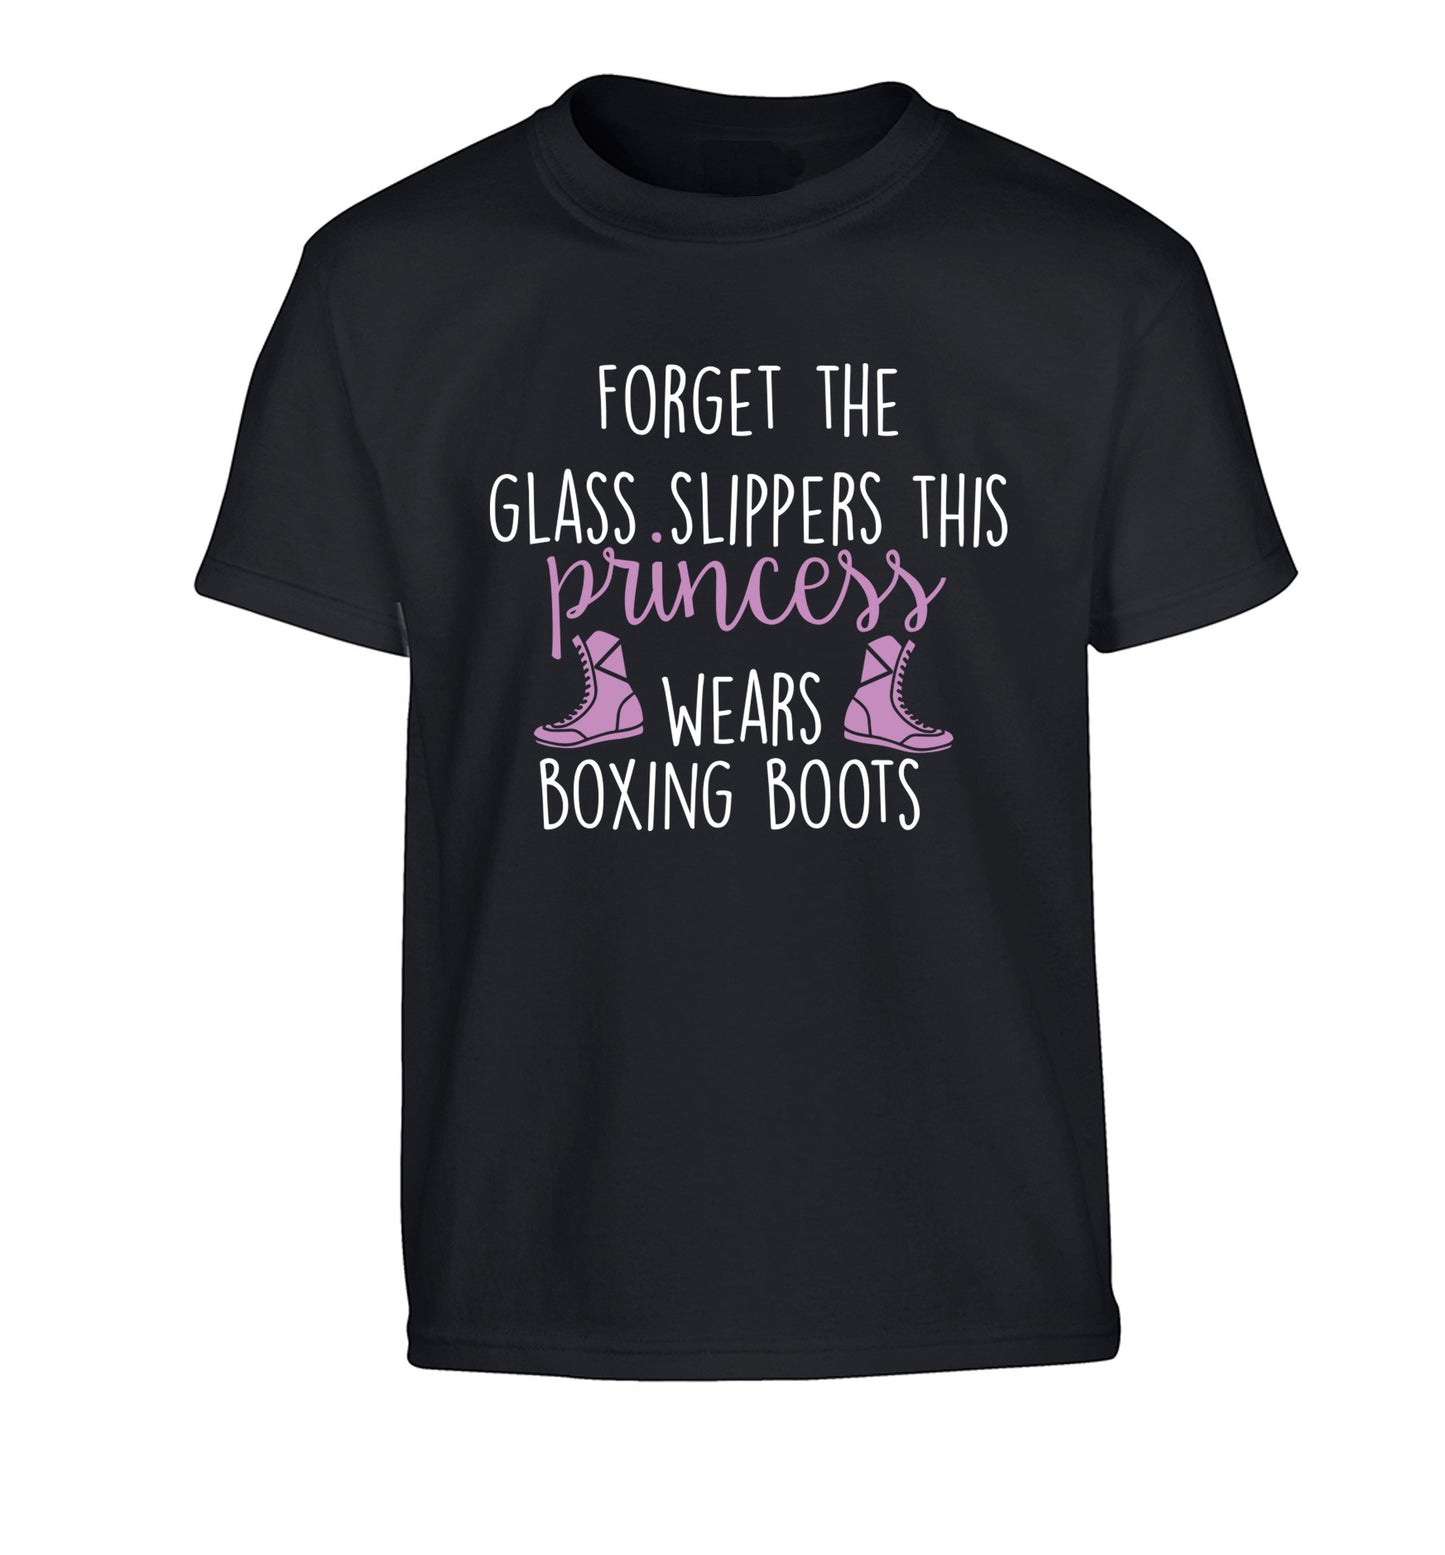 Forget the glass slippers this princess wears boxing boots Children's black Tshirt 12-14 Years